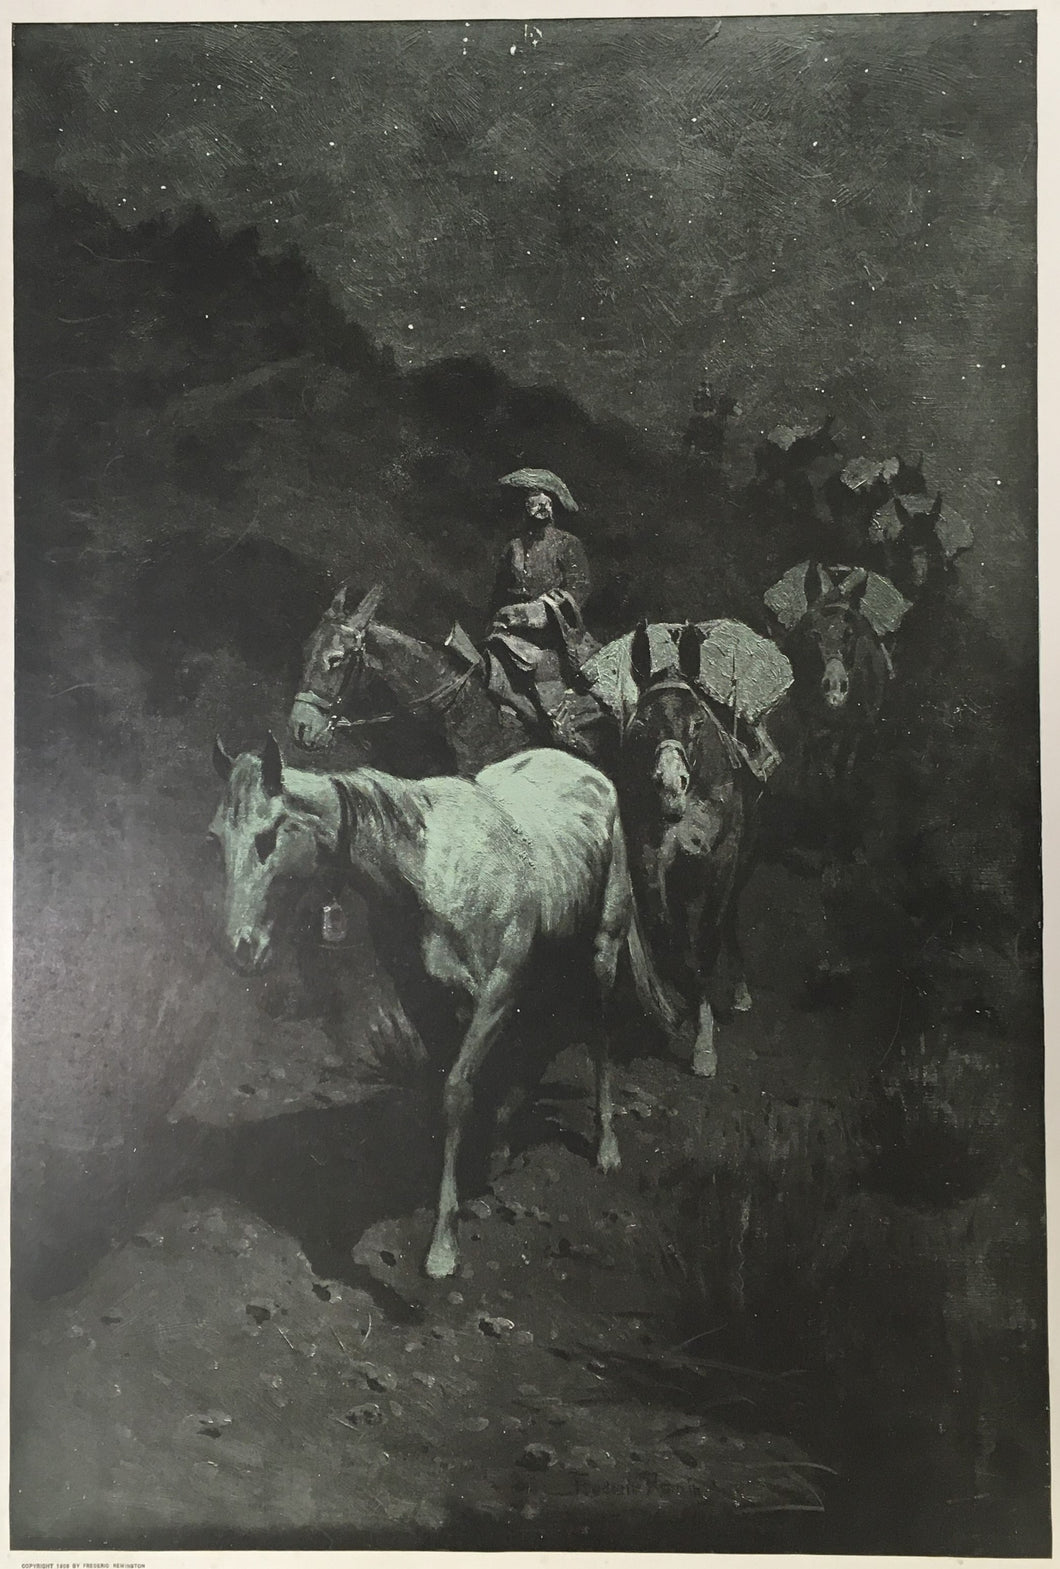 Remington, Frederic “In the Enemy’s Country or The Belle Mare”